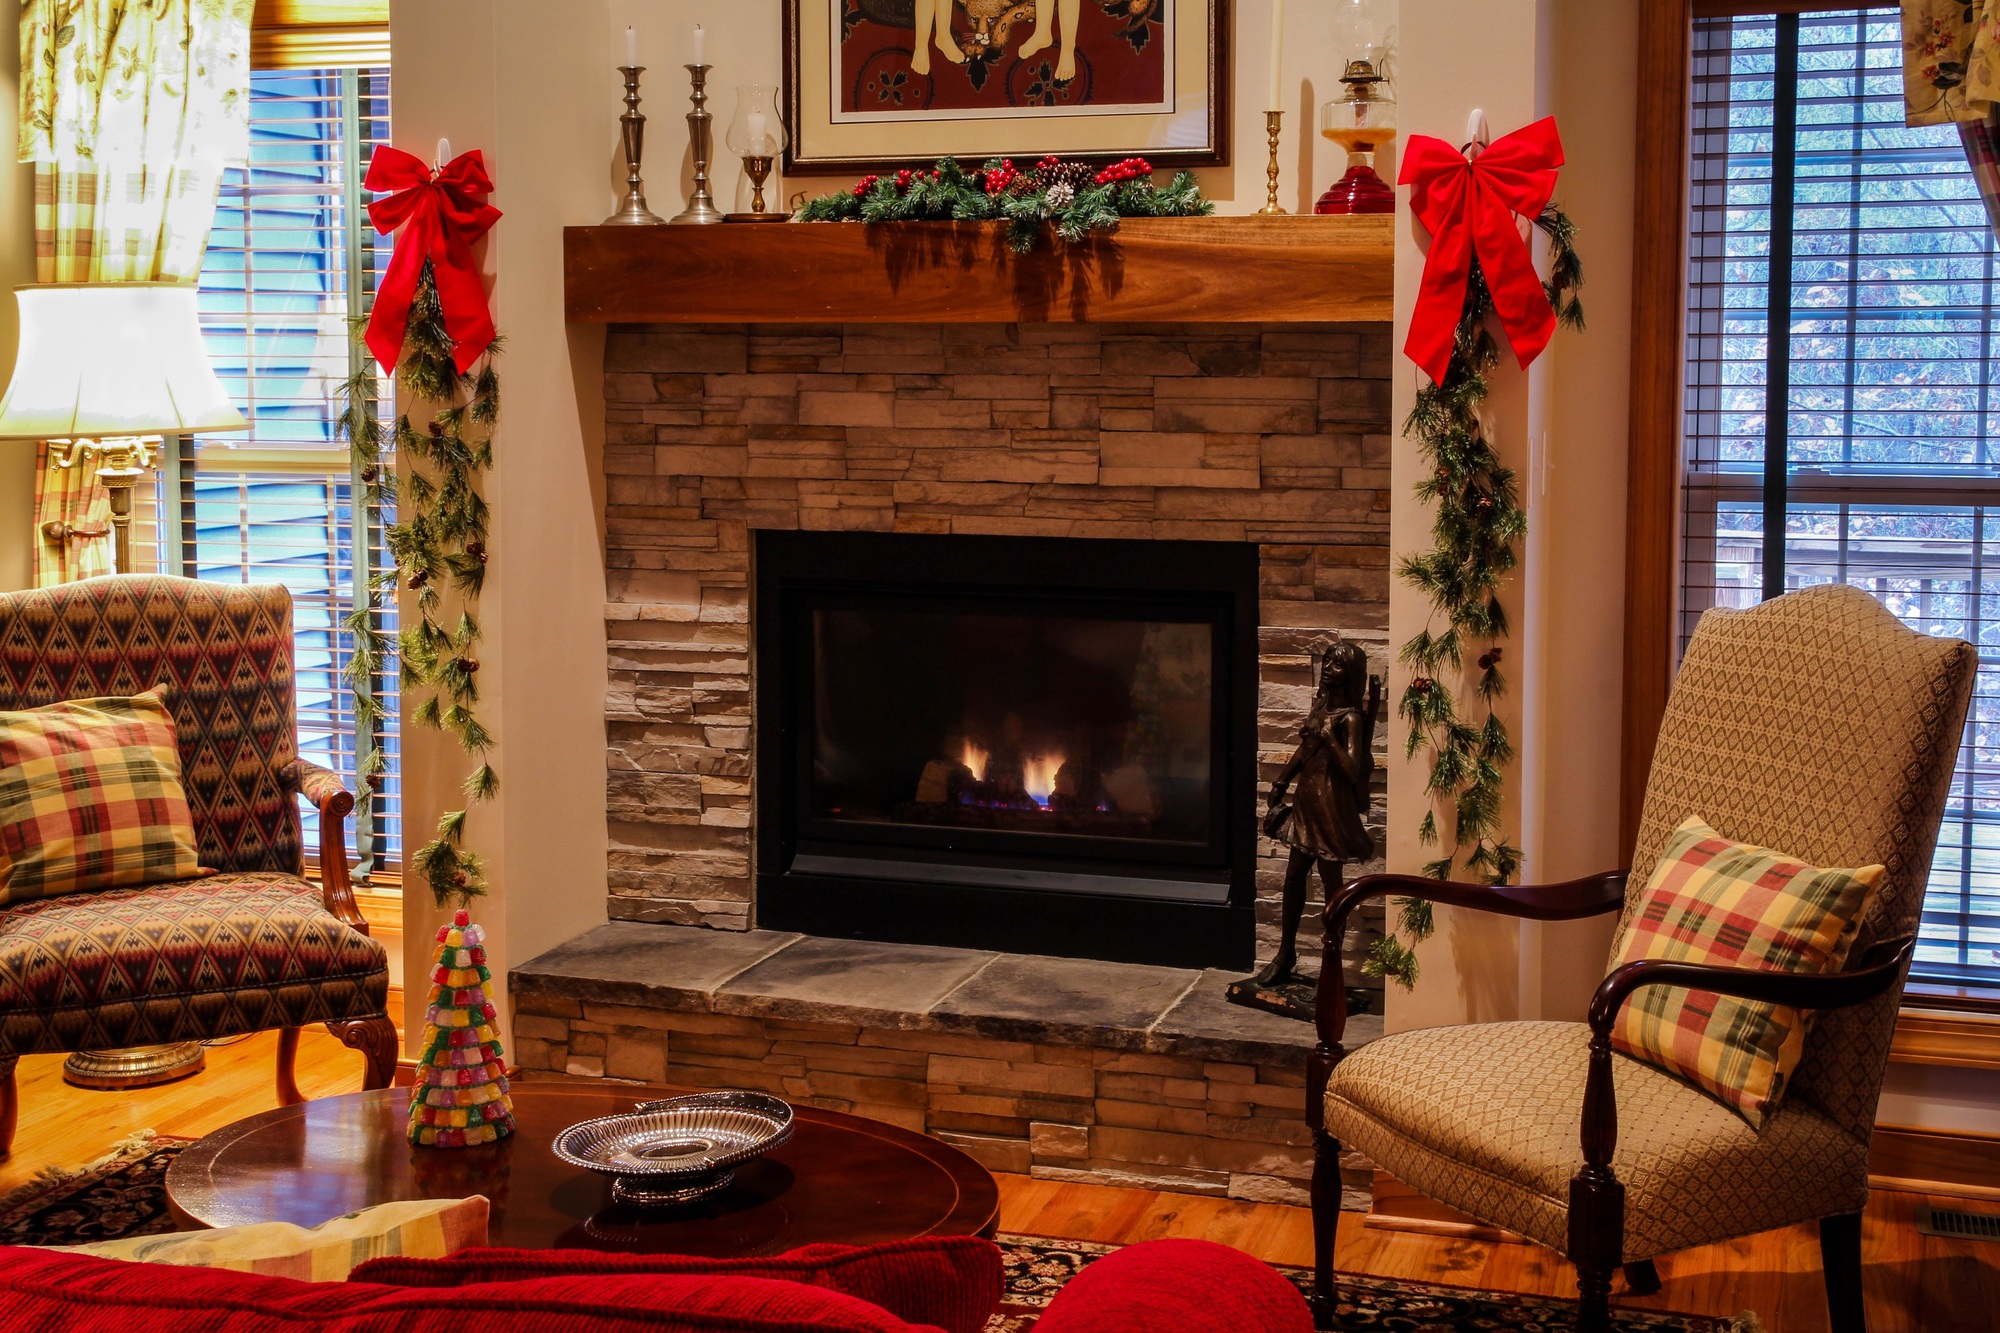 Fireplaces not only create warmth, but they also create a cozy atmosphere. Discover five reasons electric fireplaces are a smart home investment.